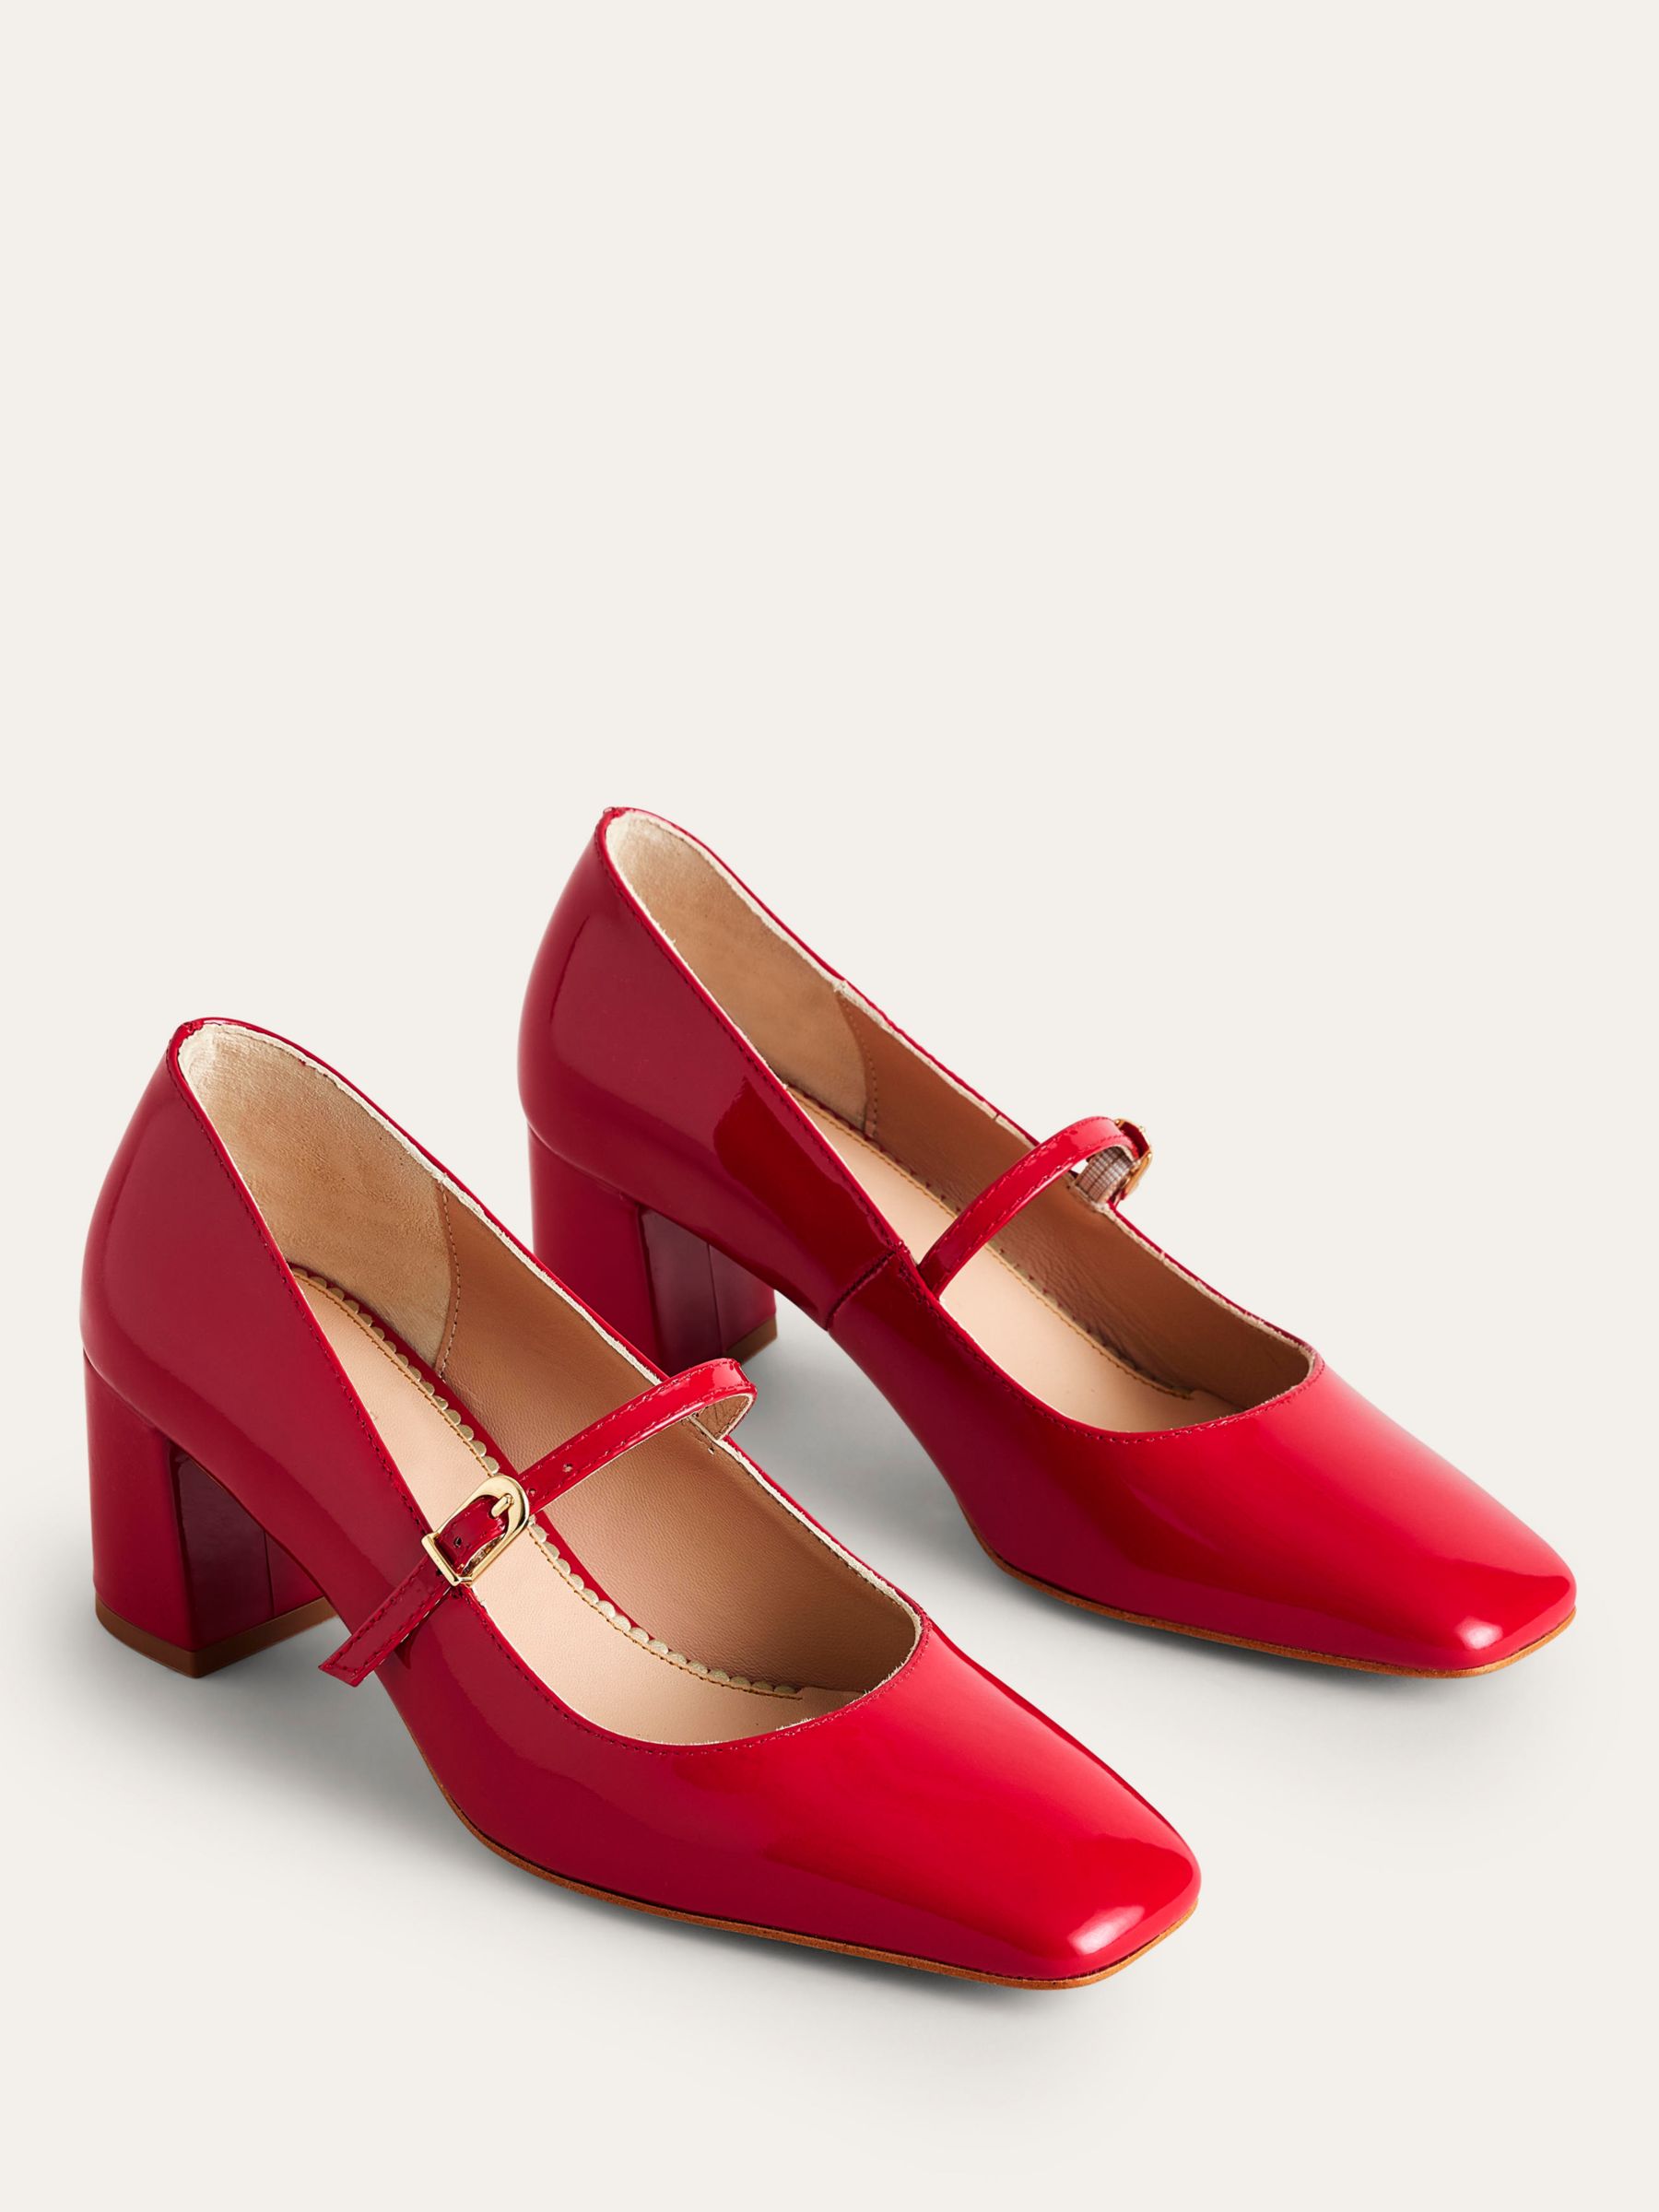 Boden Block Heel Mary Jane Shoes, Poppy Red Patent, 4